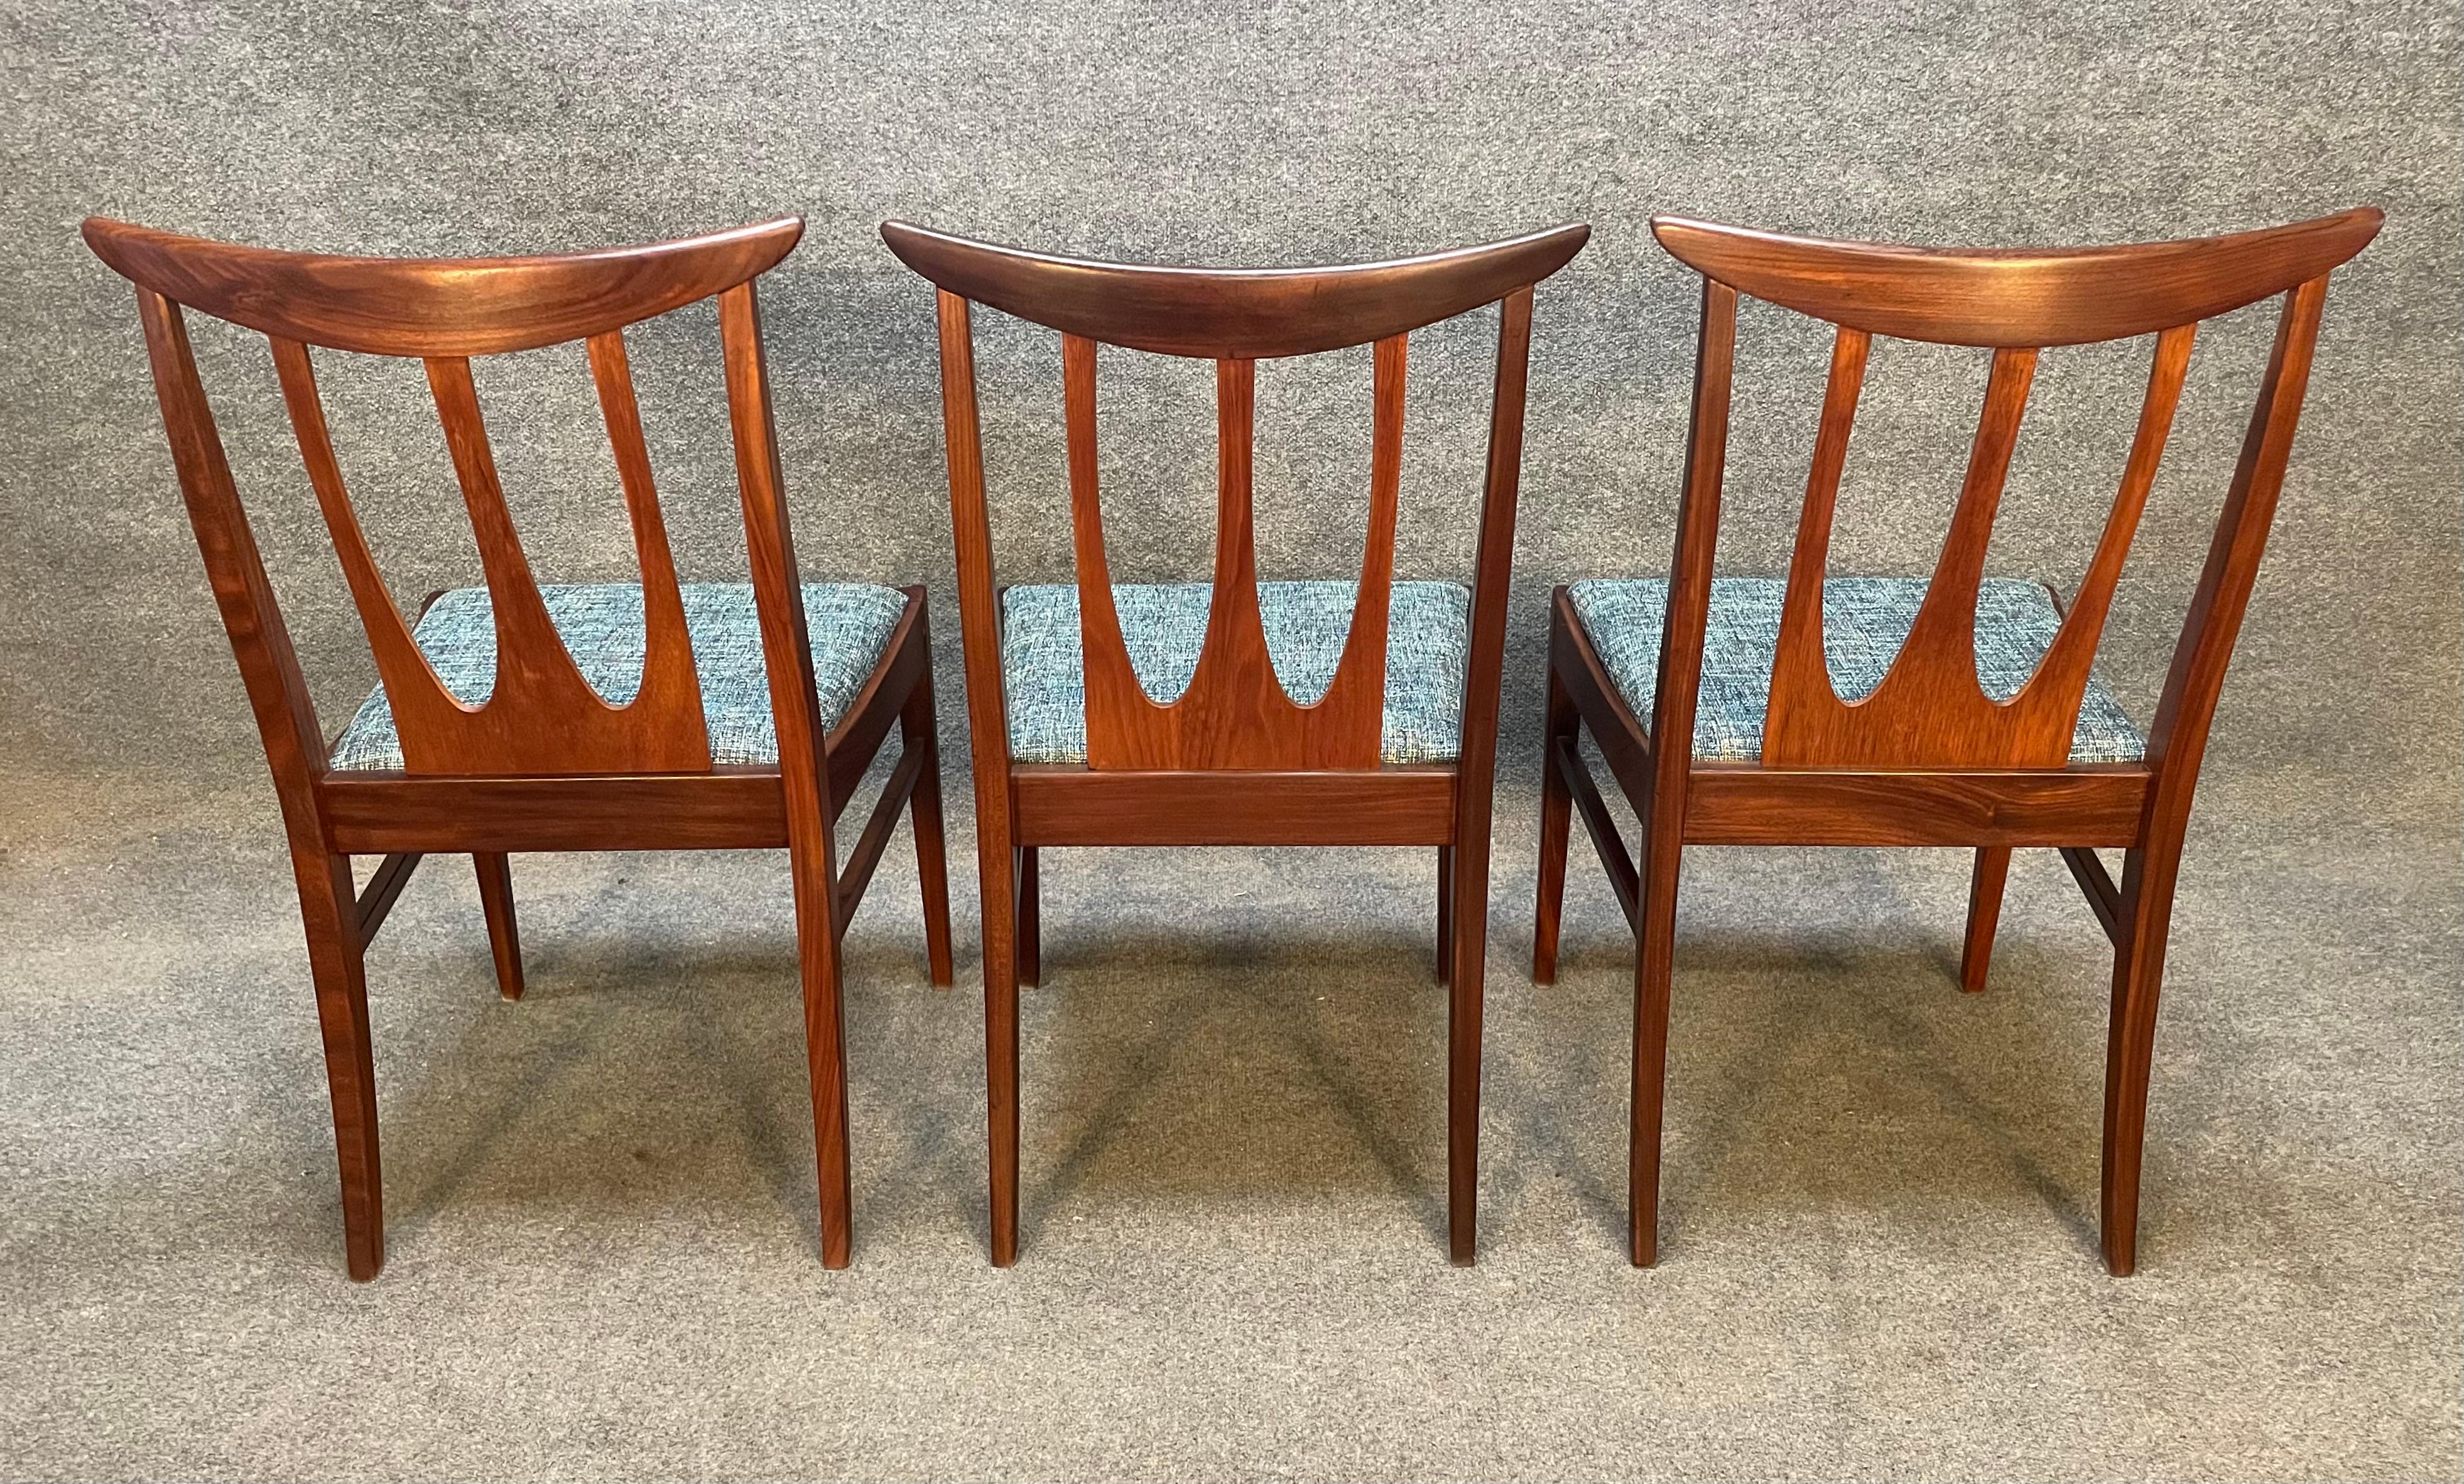 Here is a beautiful set of six British Mid-Century Modern 